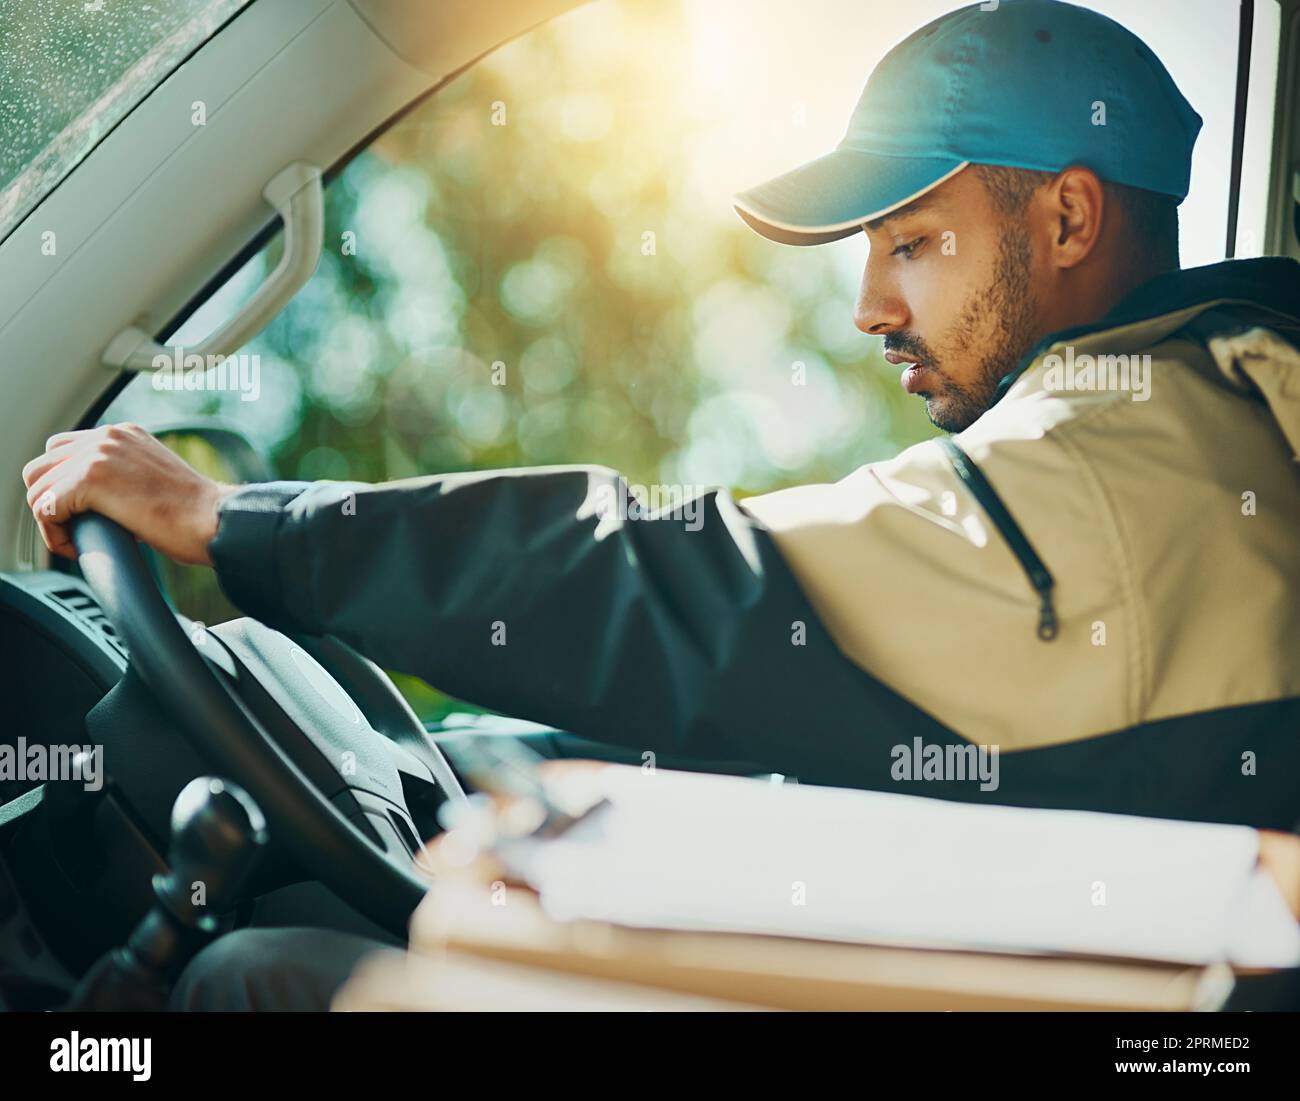 Making his rounds. a courier making deliveries in his van. Stock Photo